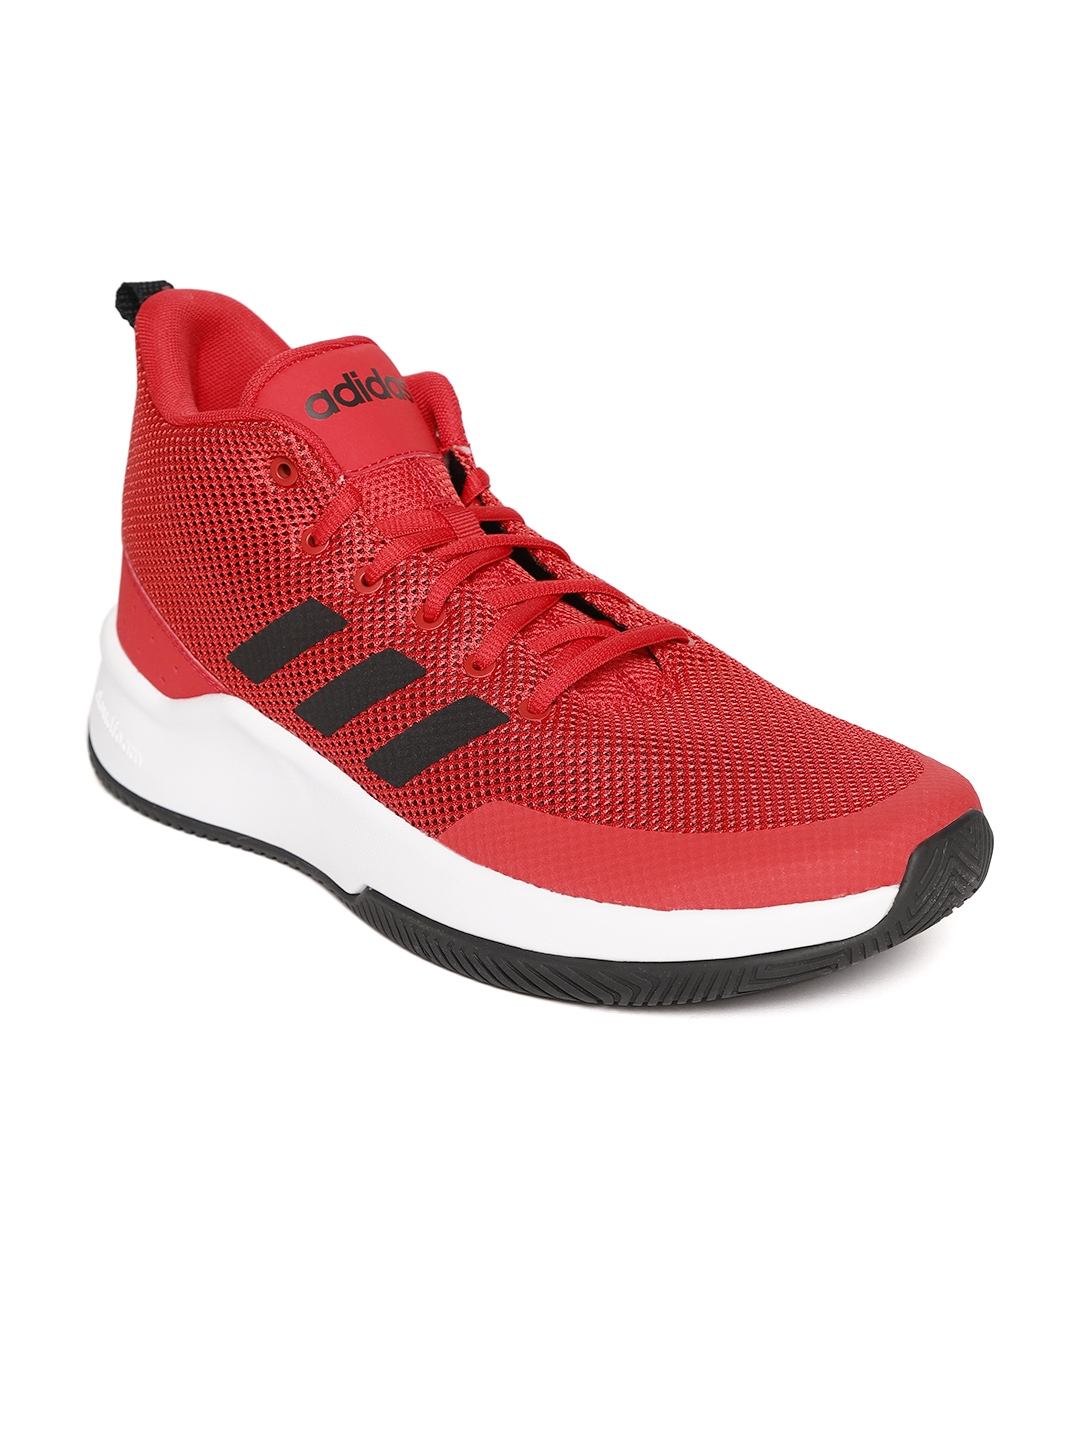 red basketball shoes adidas